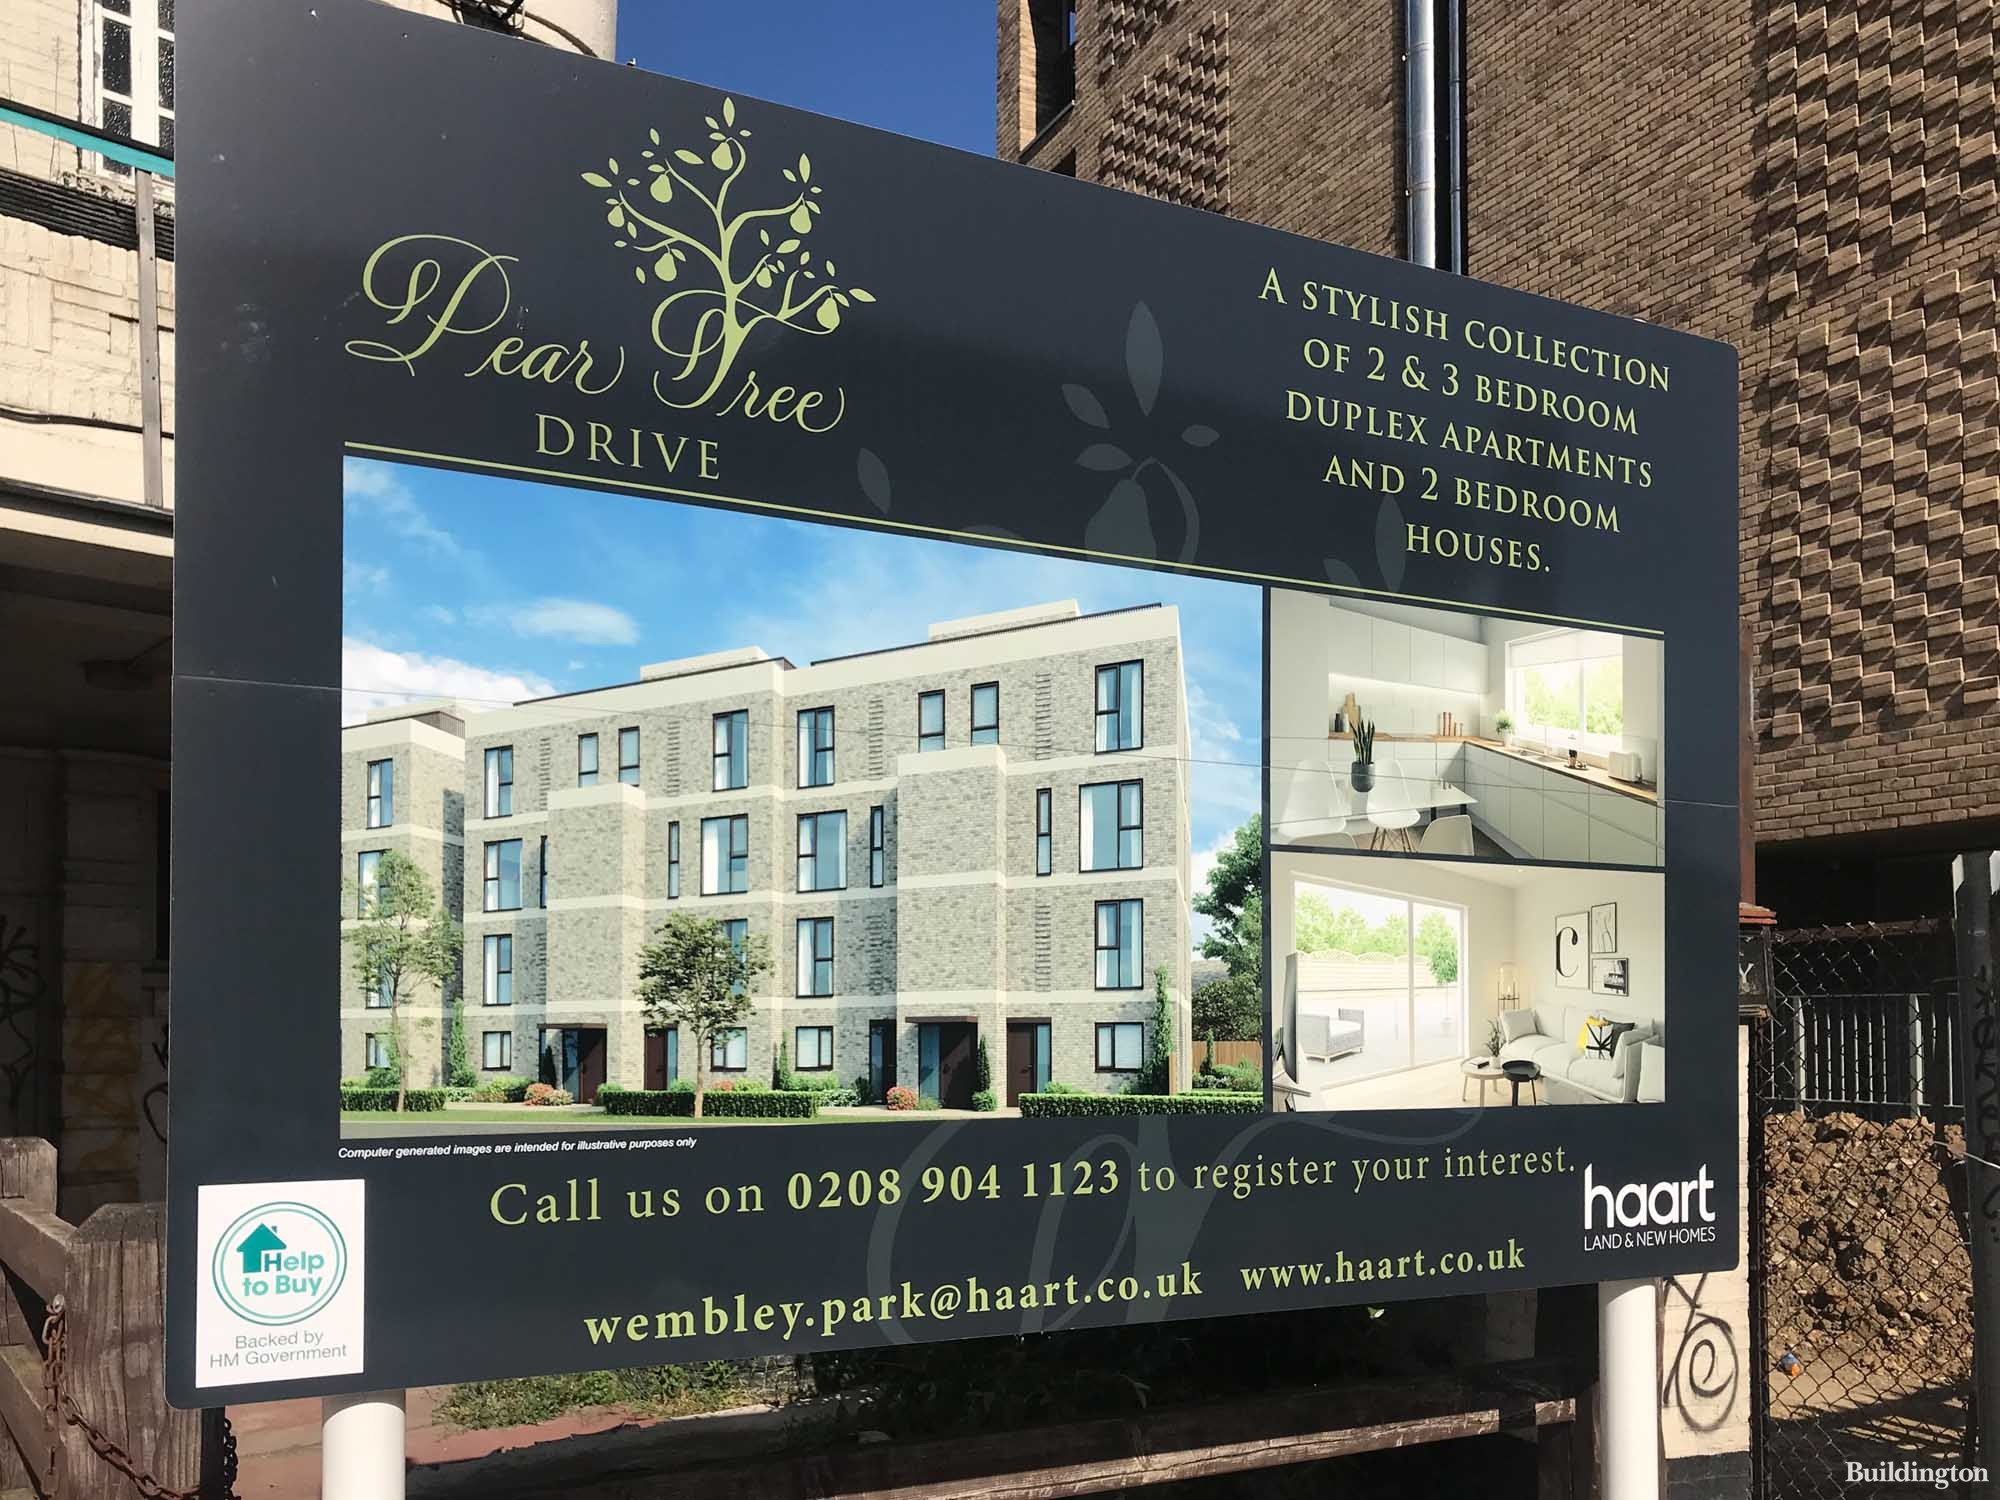 Pear Tree Drive development board on Ealing Road. A stylish collection of 2 and 3 bedroom apartments and 3-bedroom houses advertised by estate agent Haart.